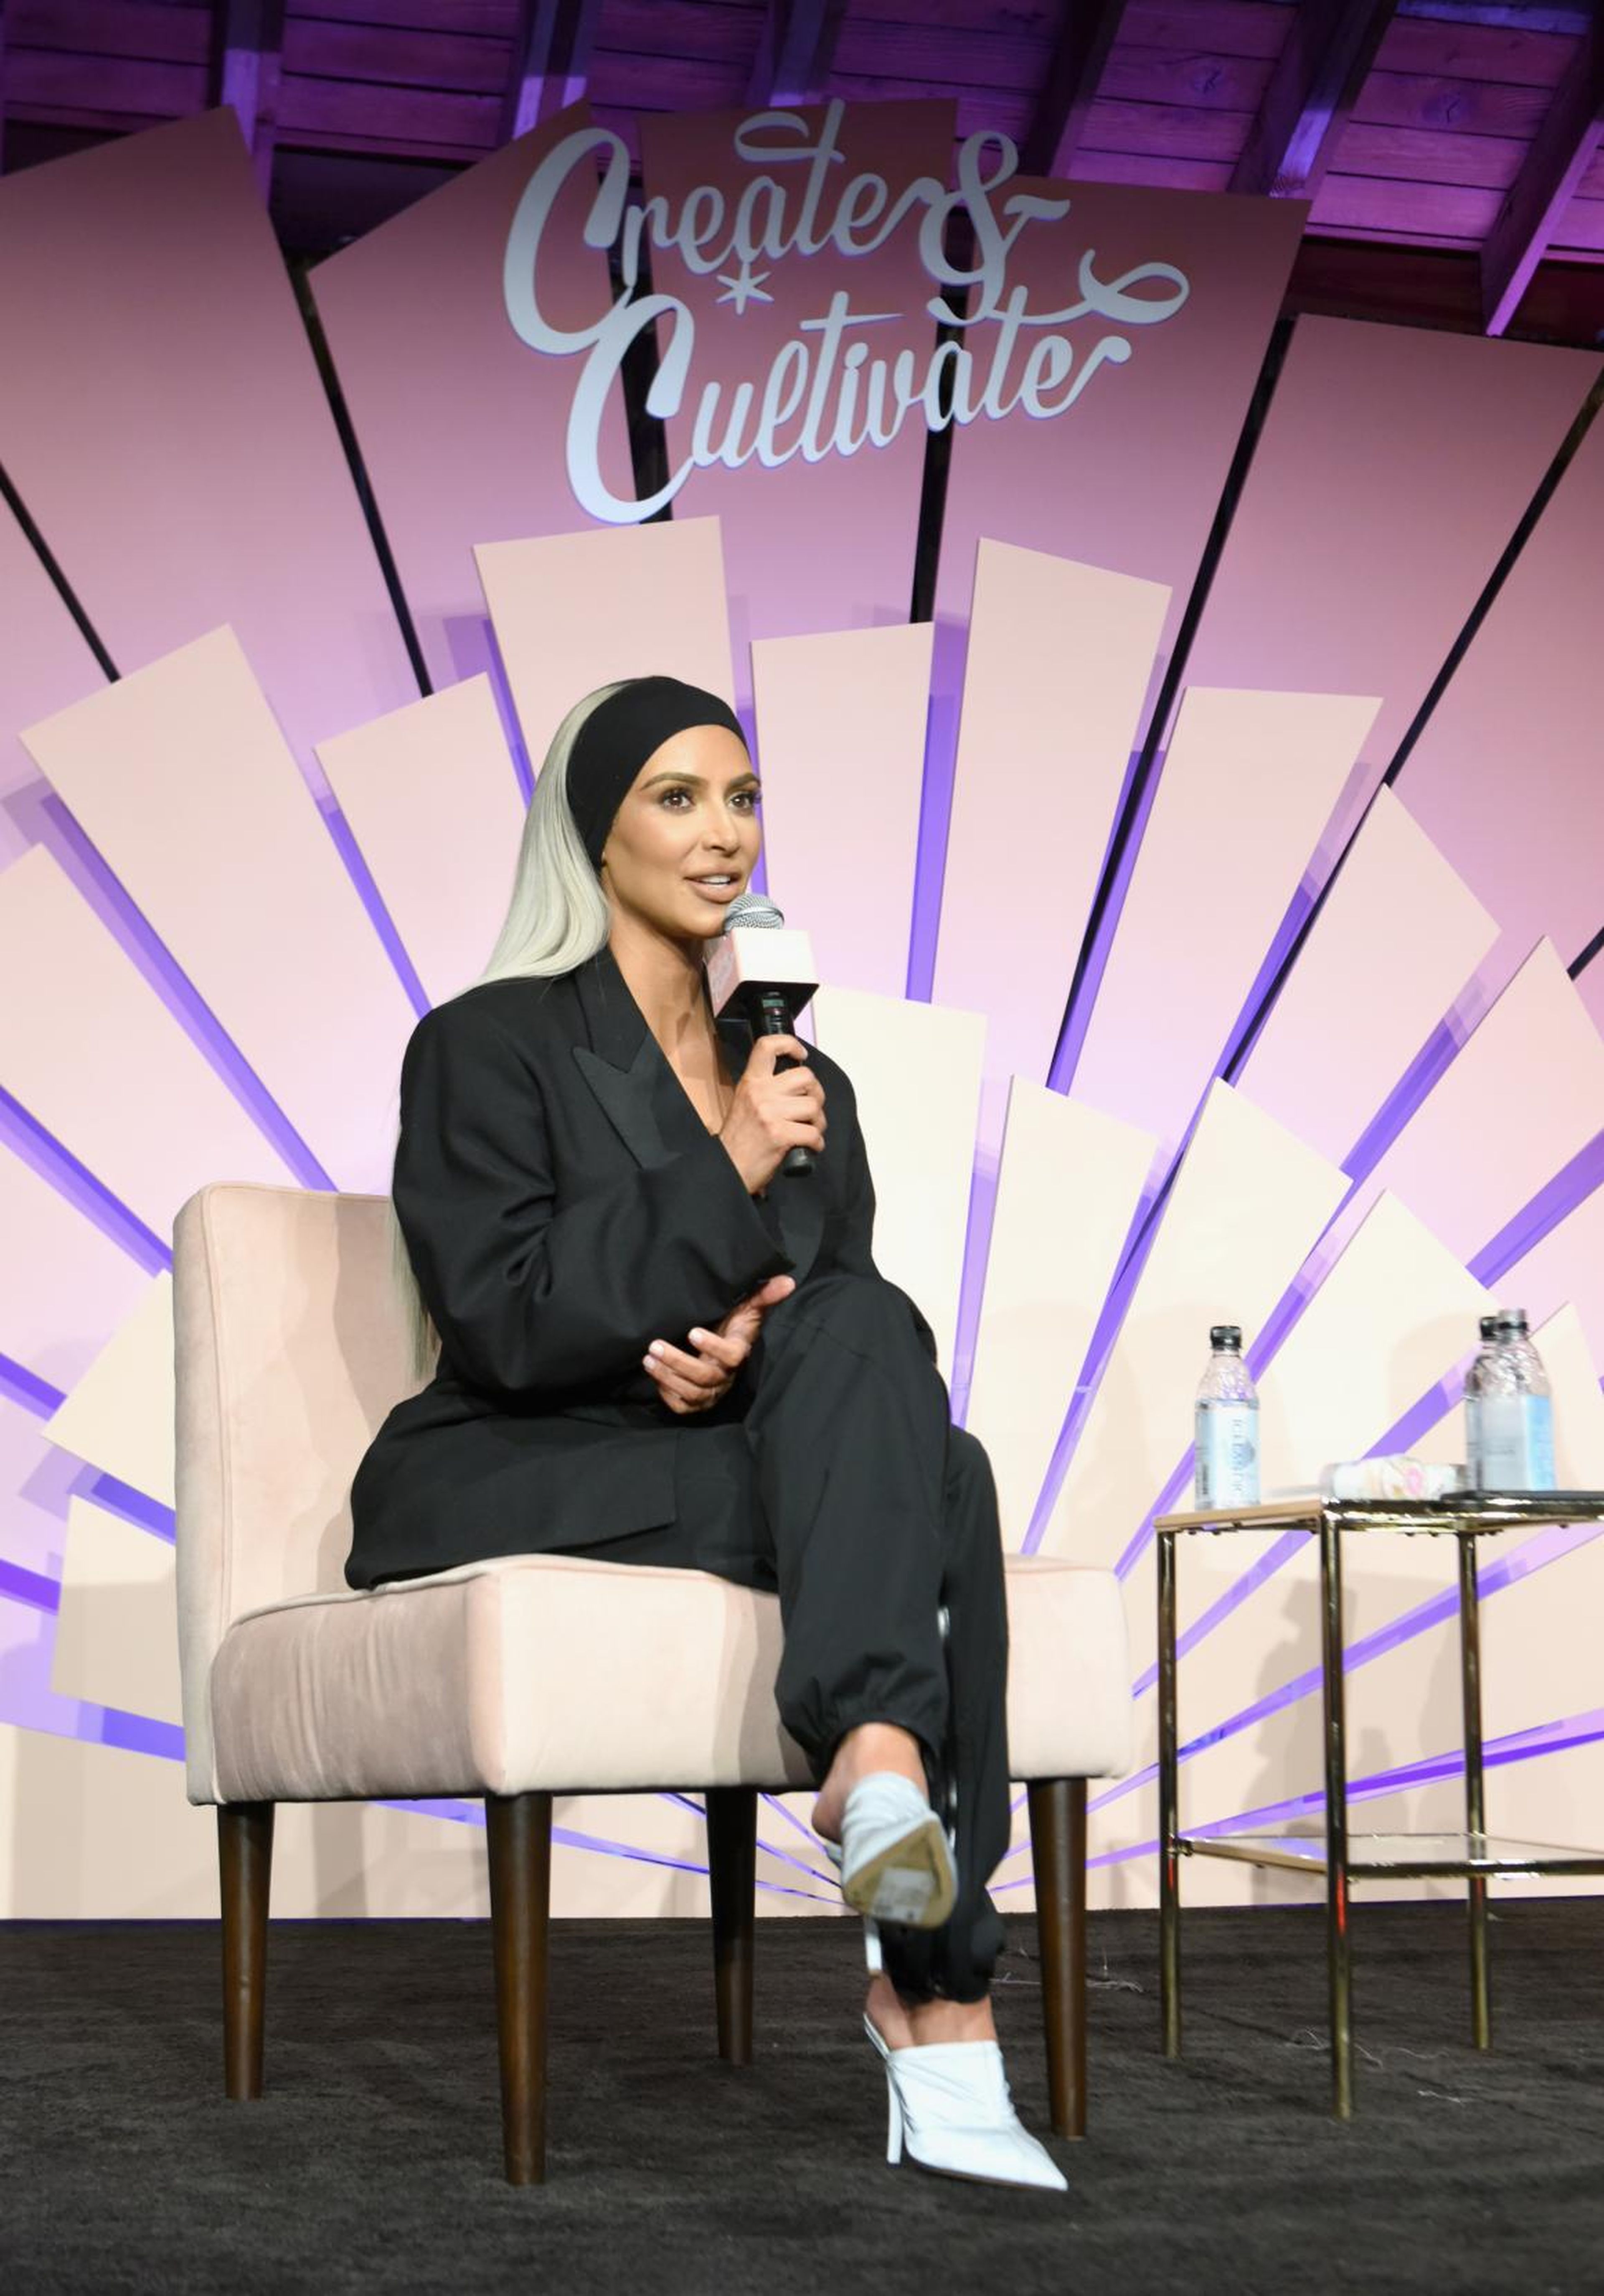 For the past few years, Kim has also been speaking at and even headlining conferences like Glamour's Women of the Year Summit, Create & Cultivate, the #BlogHer16 Conference, Re/Code, and more.